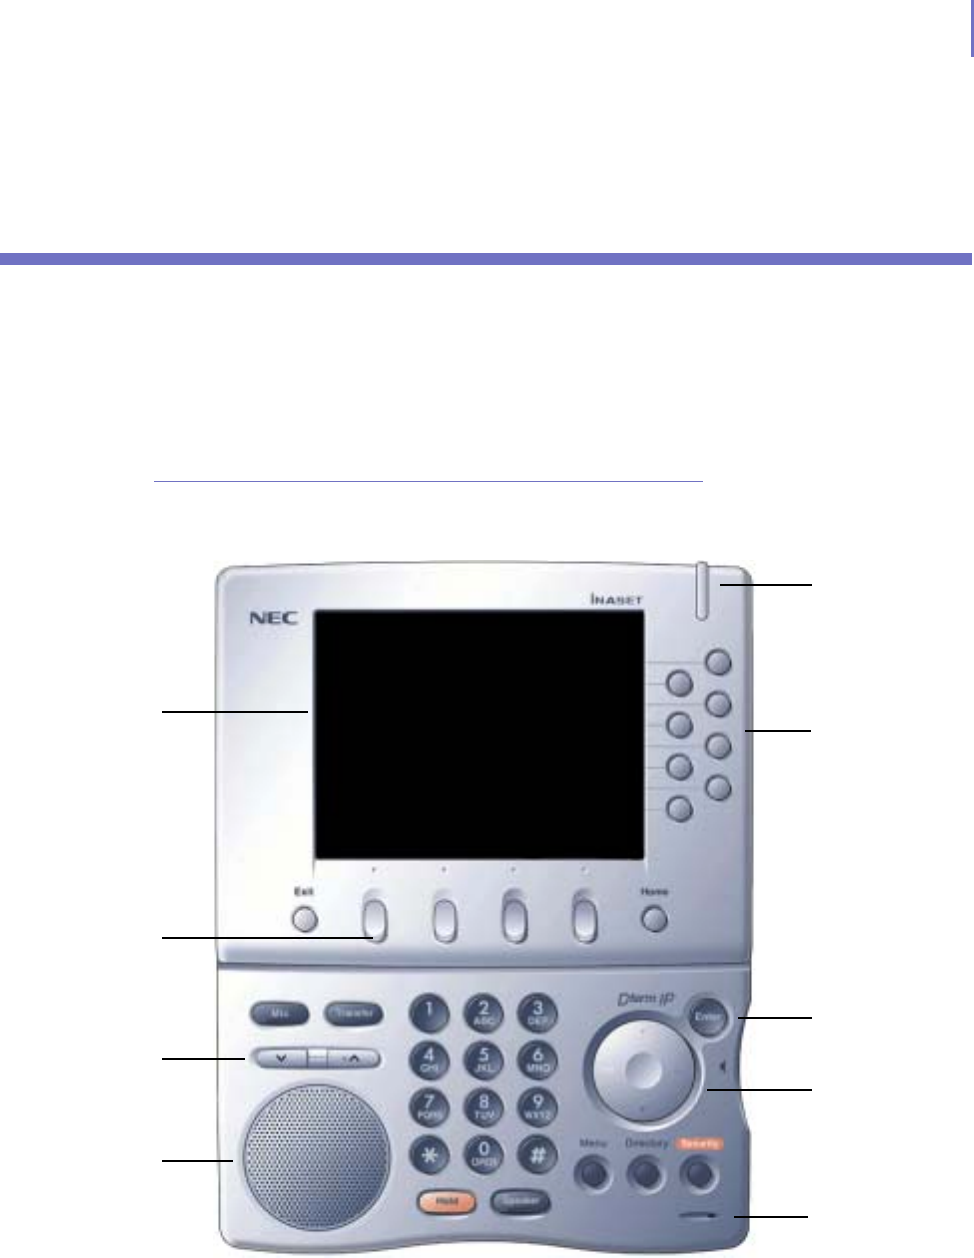 Page 12 Of Nec Telephone Neax 2000 Ips User Guide